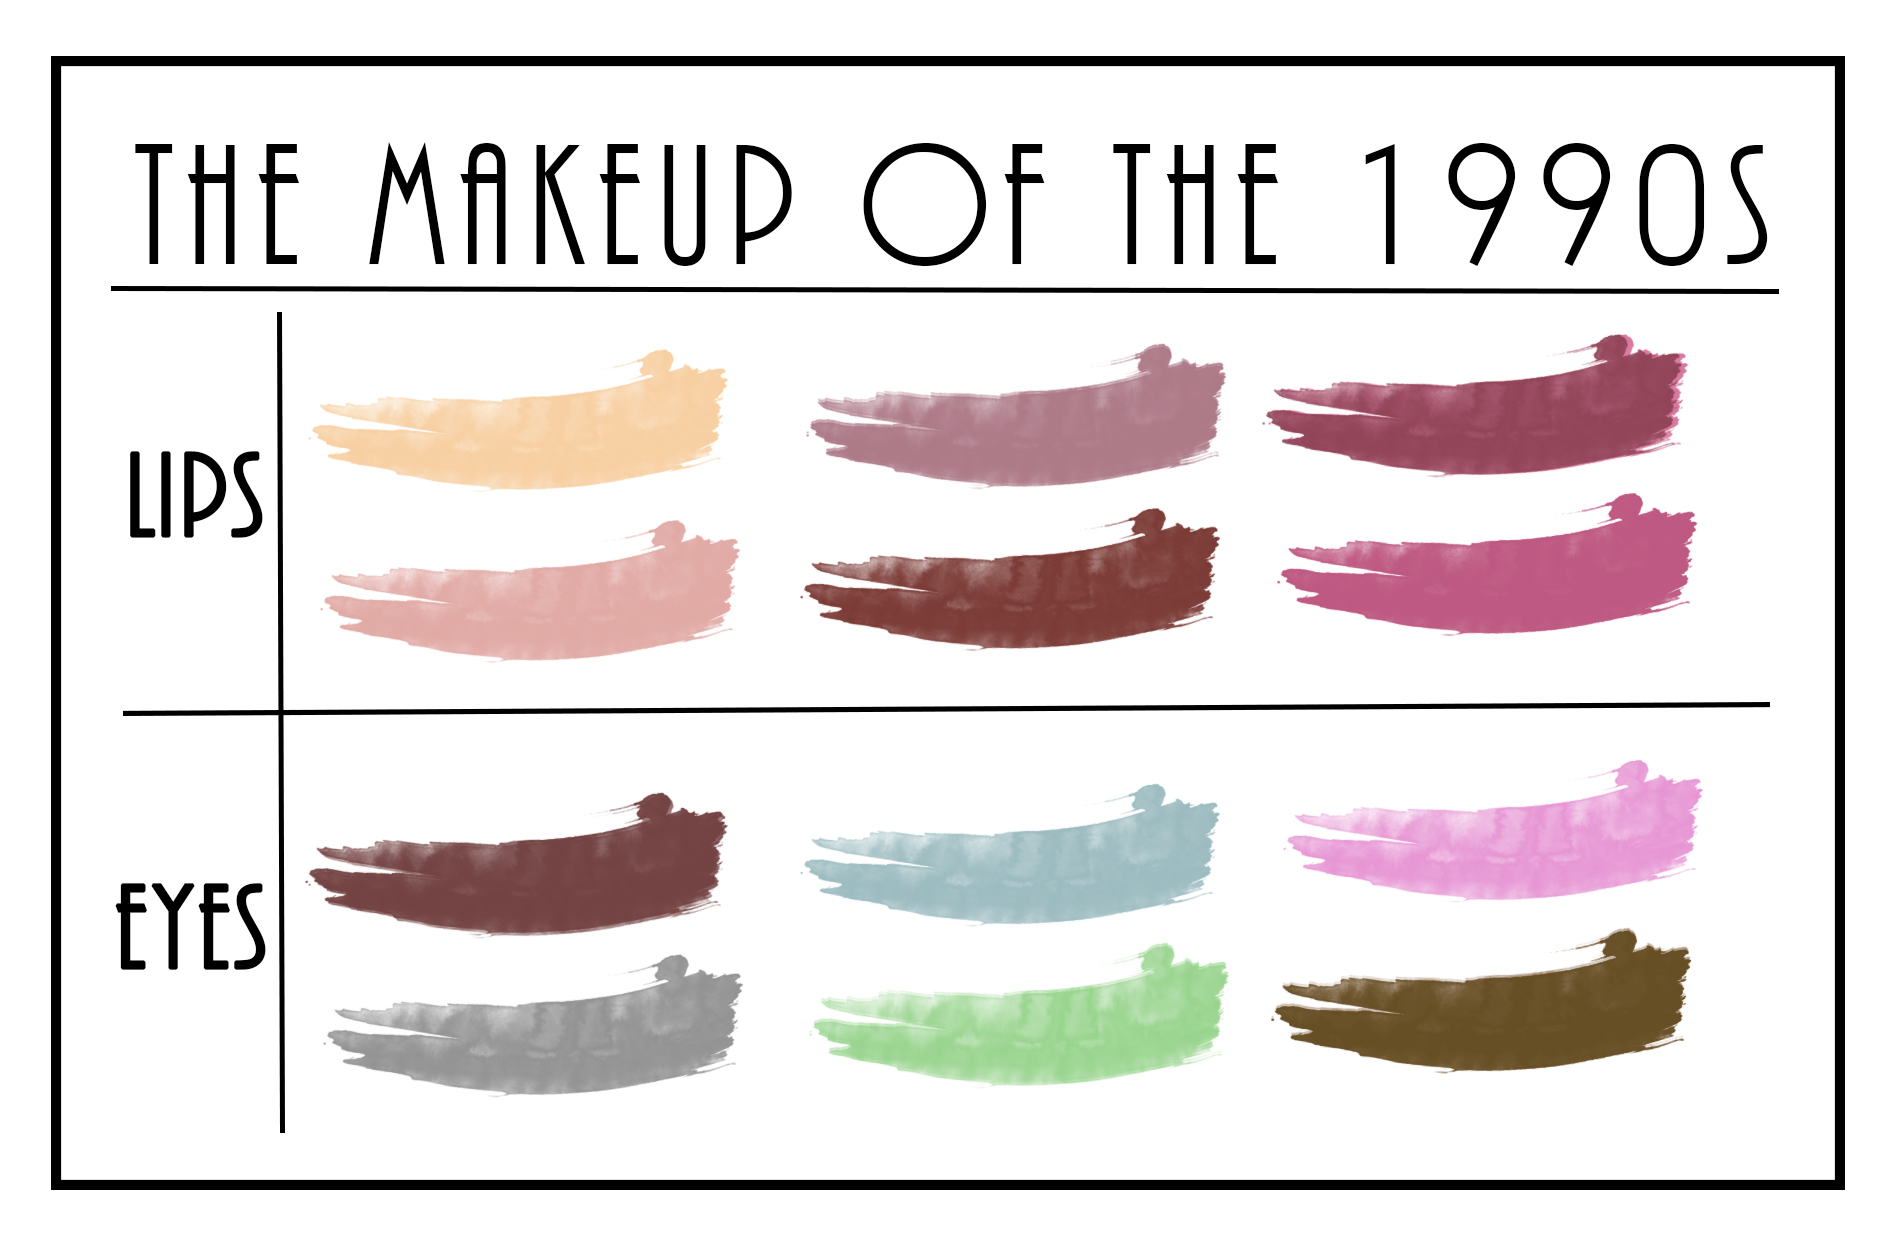 1990s makeup and hair